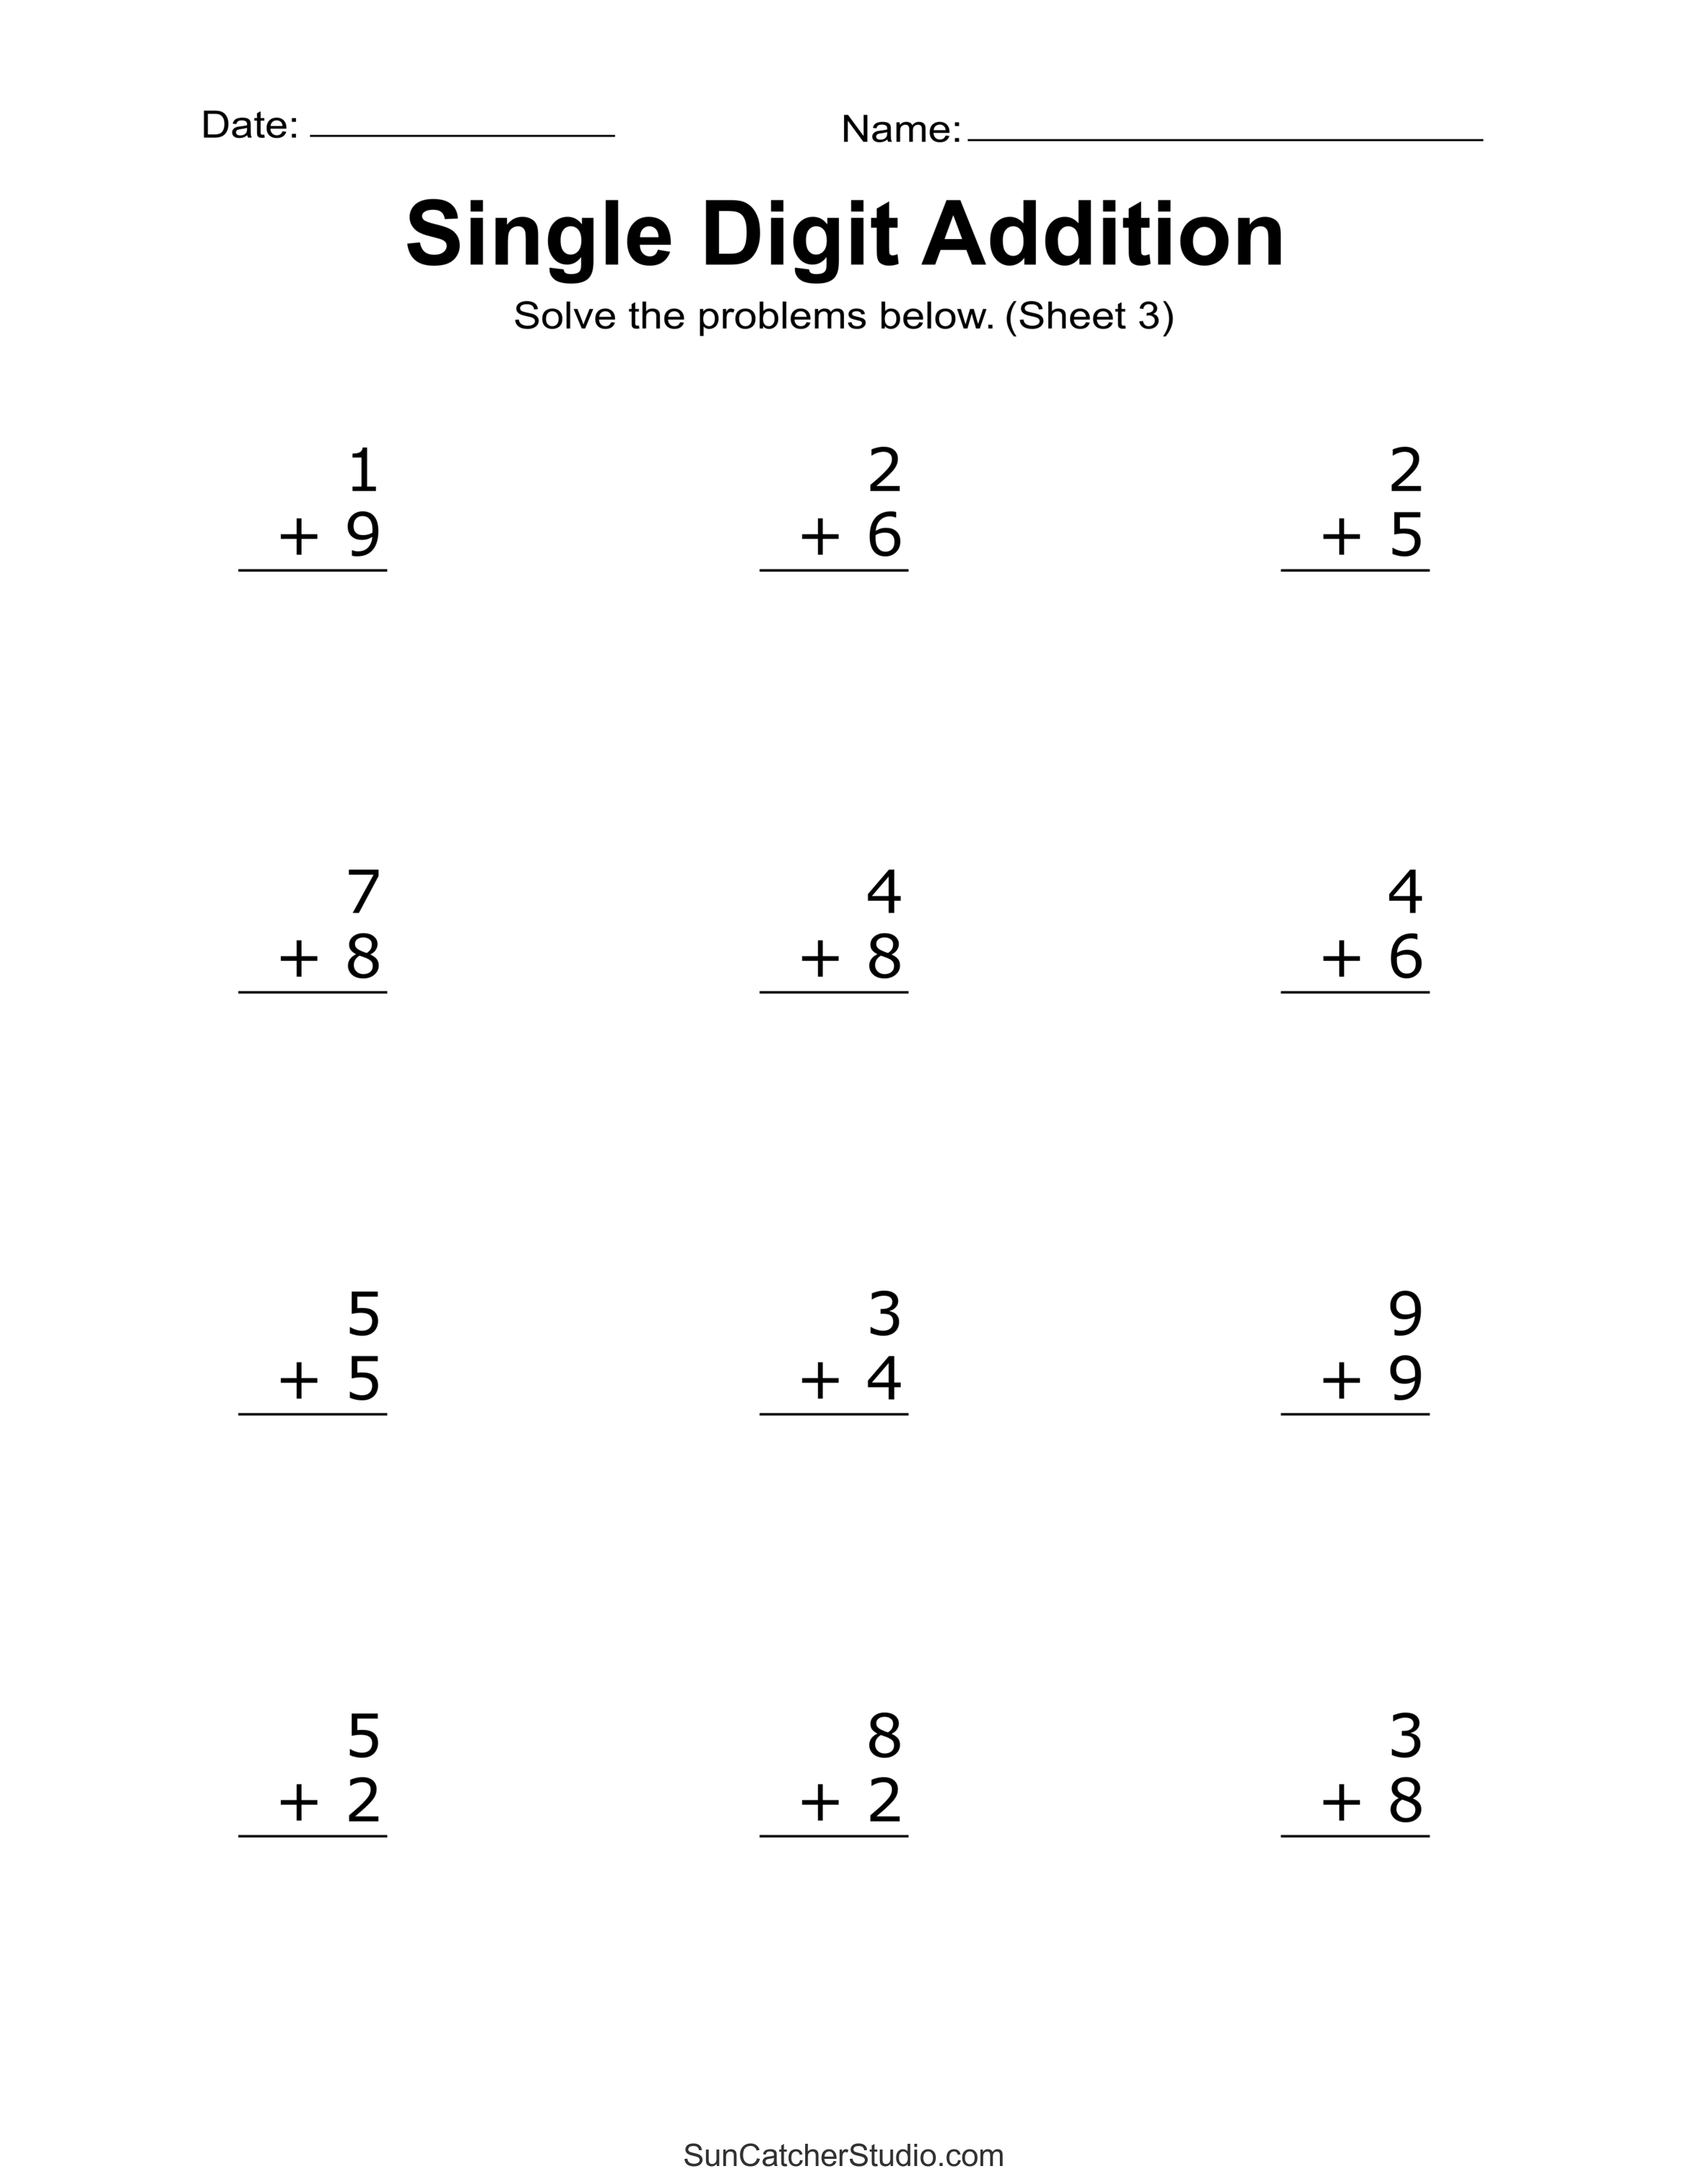 addition-worksheets-free-printable-easy-math-problems-diy-projects